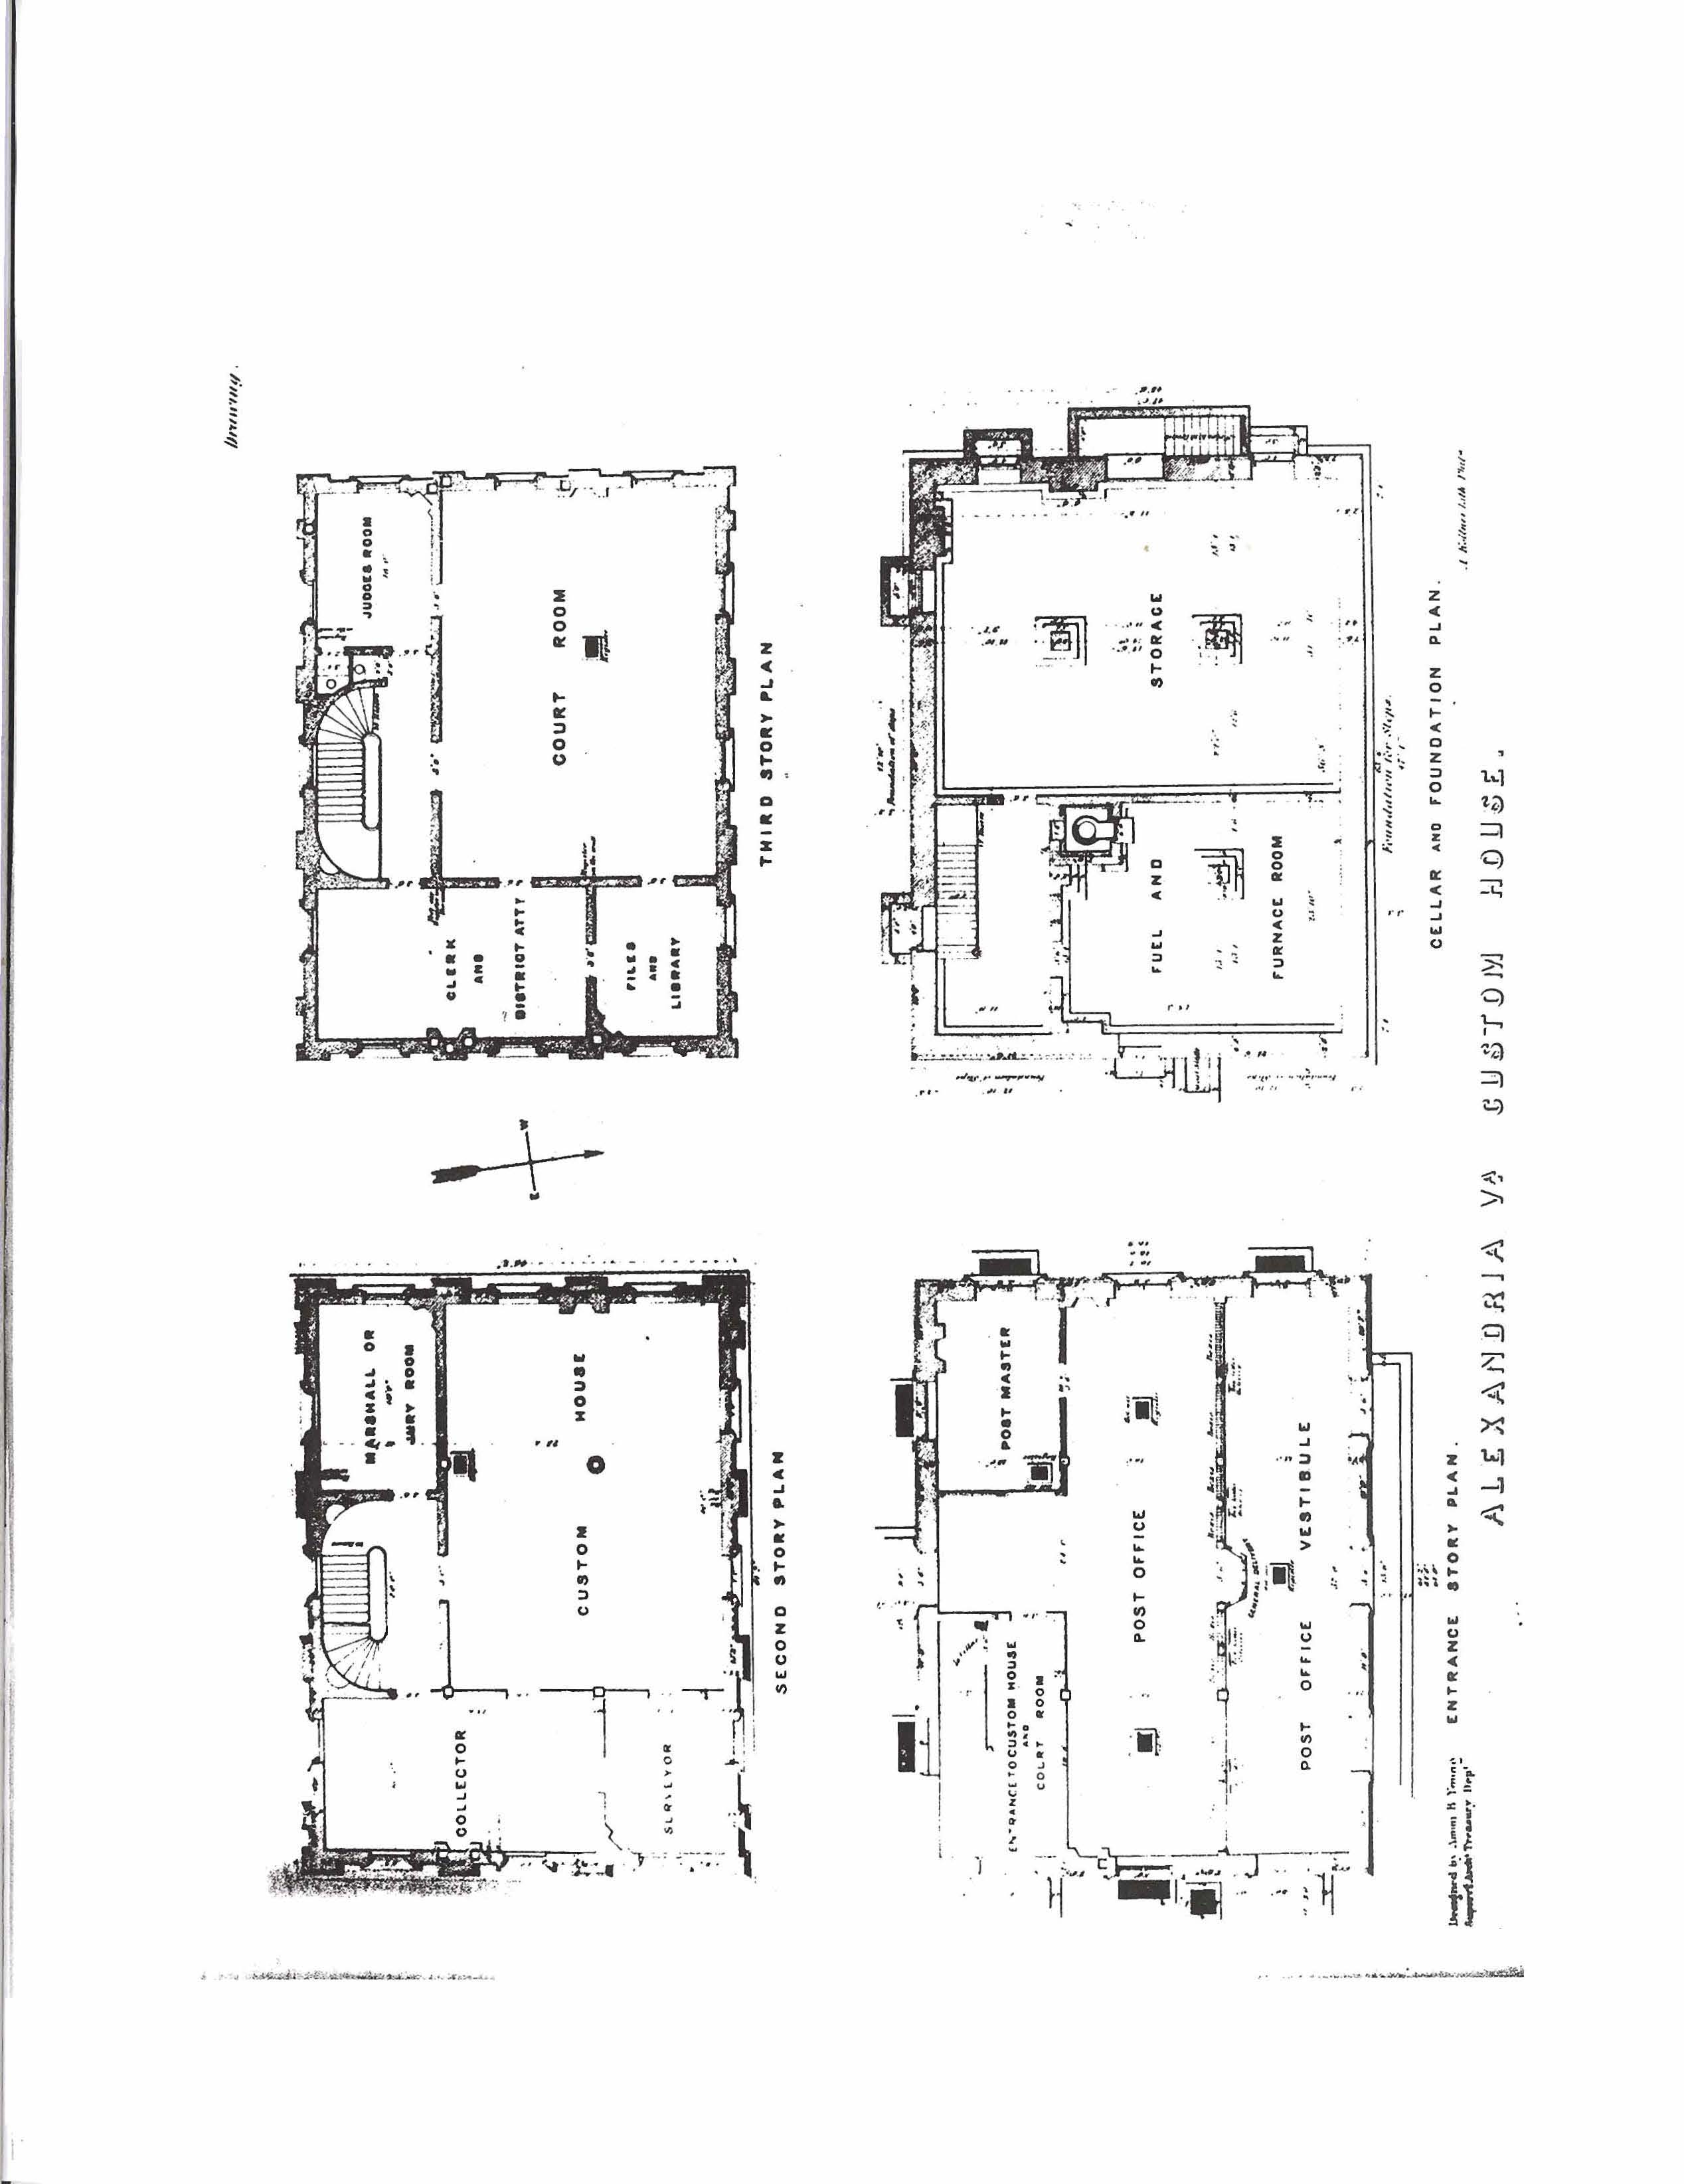 Ammi B. Young, Supervising Architect of the Treasury and his 1858 Alexandria Post Office and Customhouse, page 16 of 16